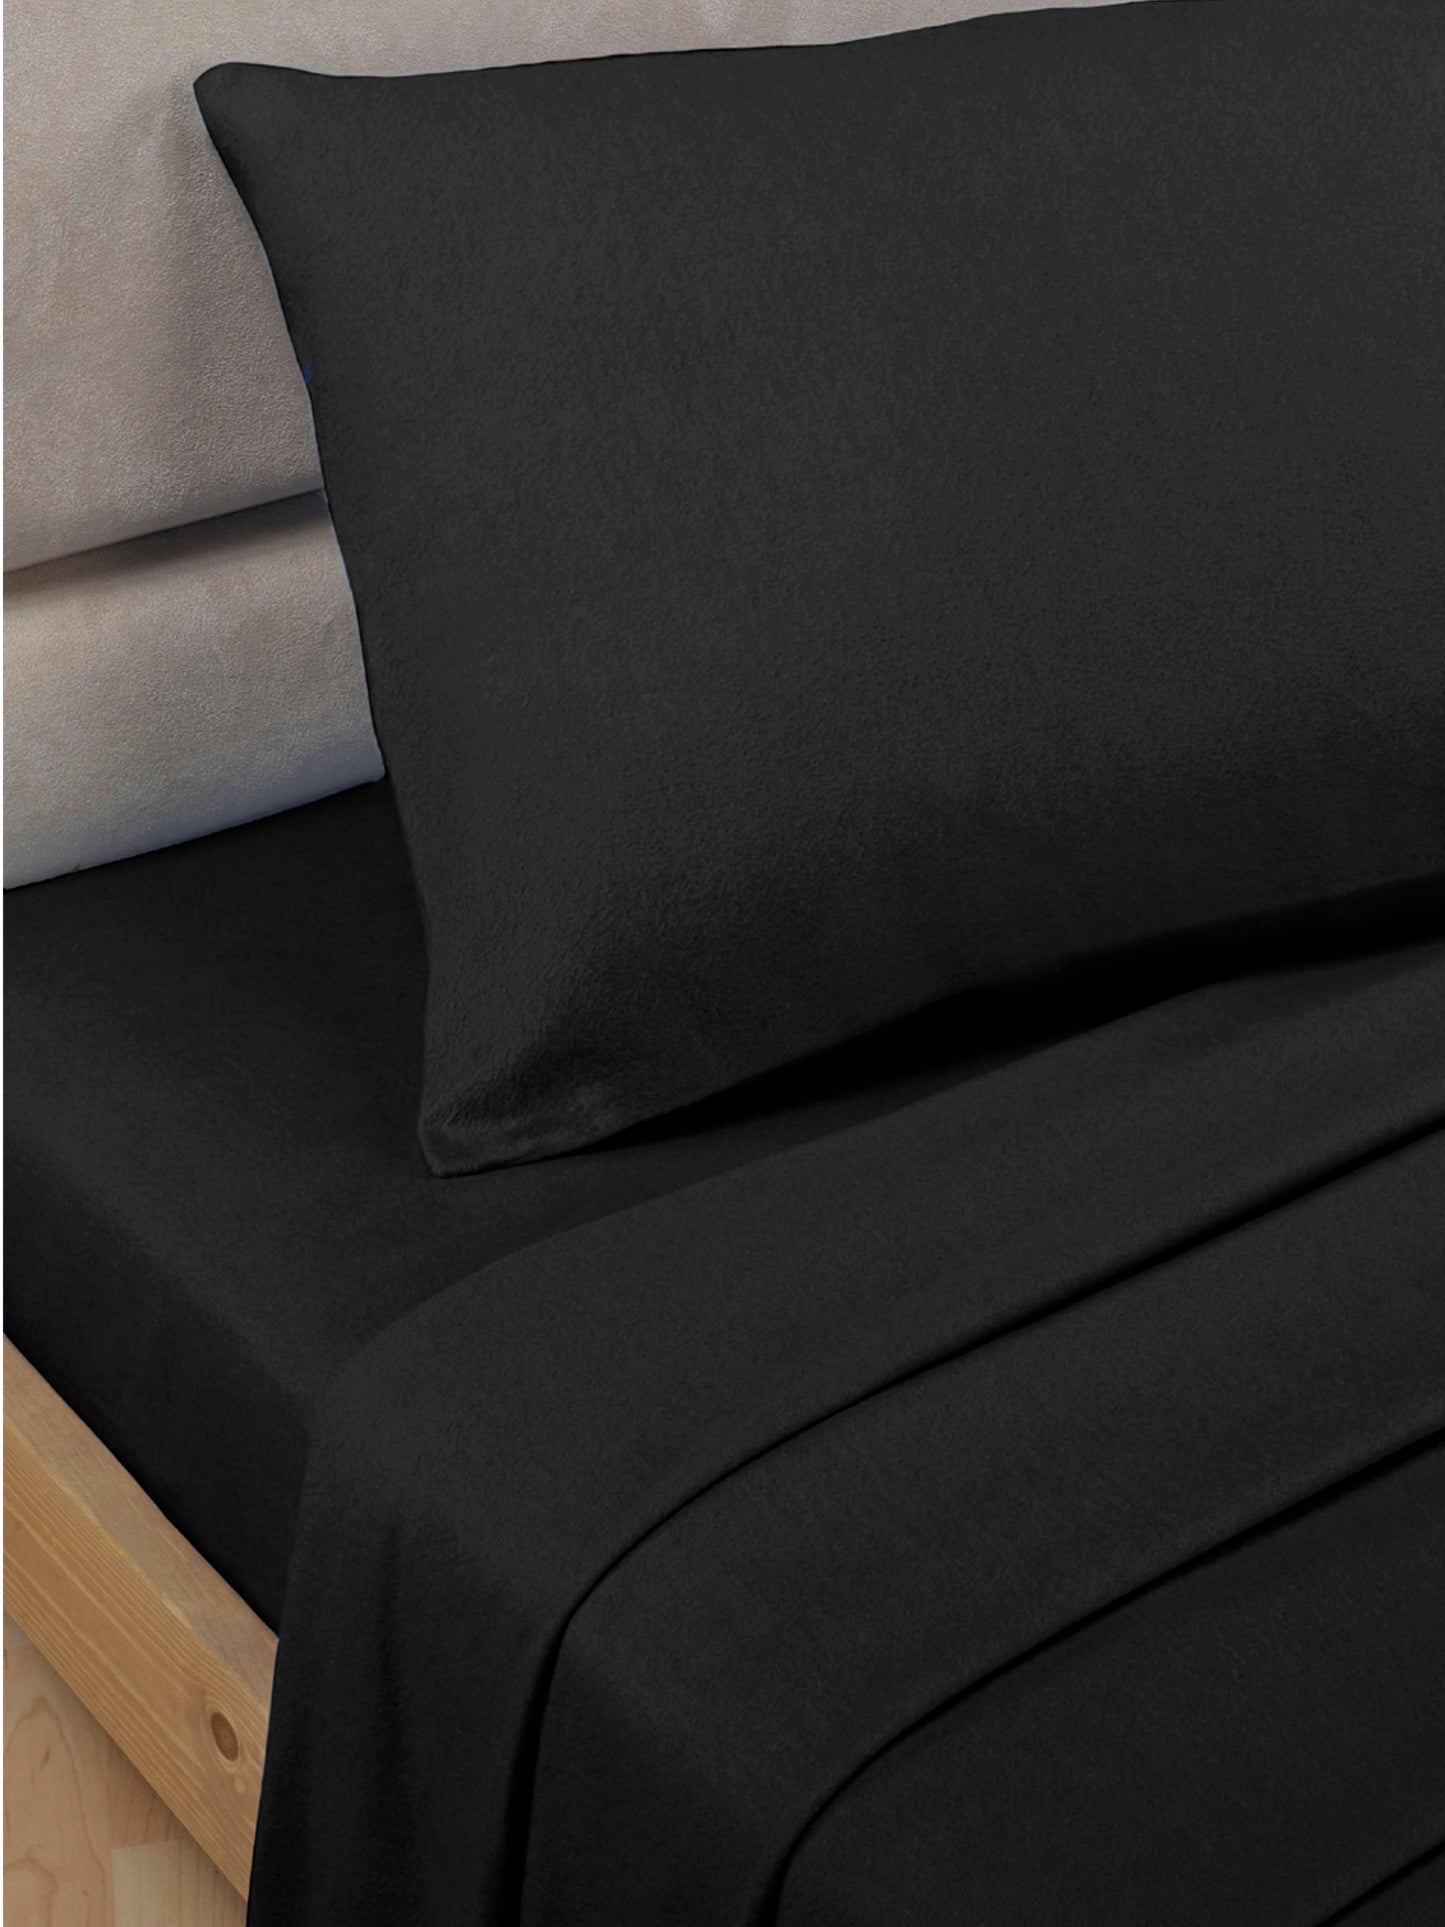 Percale Luxury Extra Deep Fitted Sheet Black